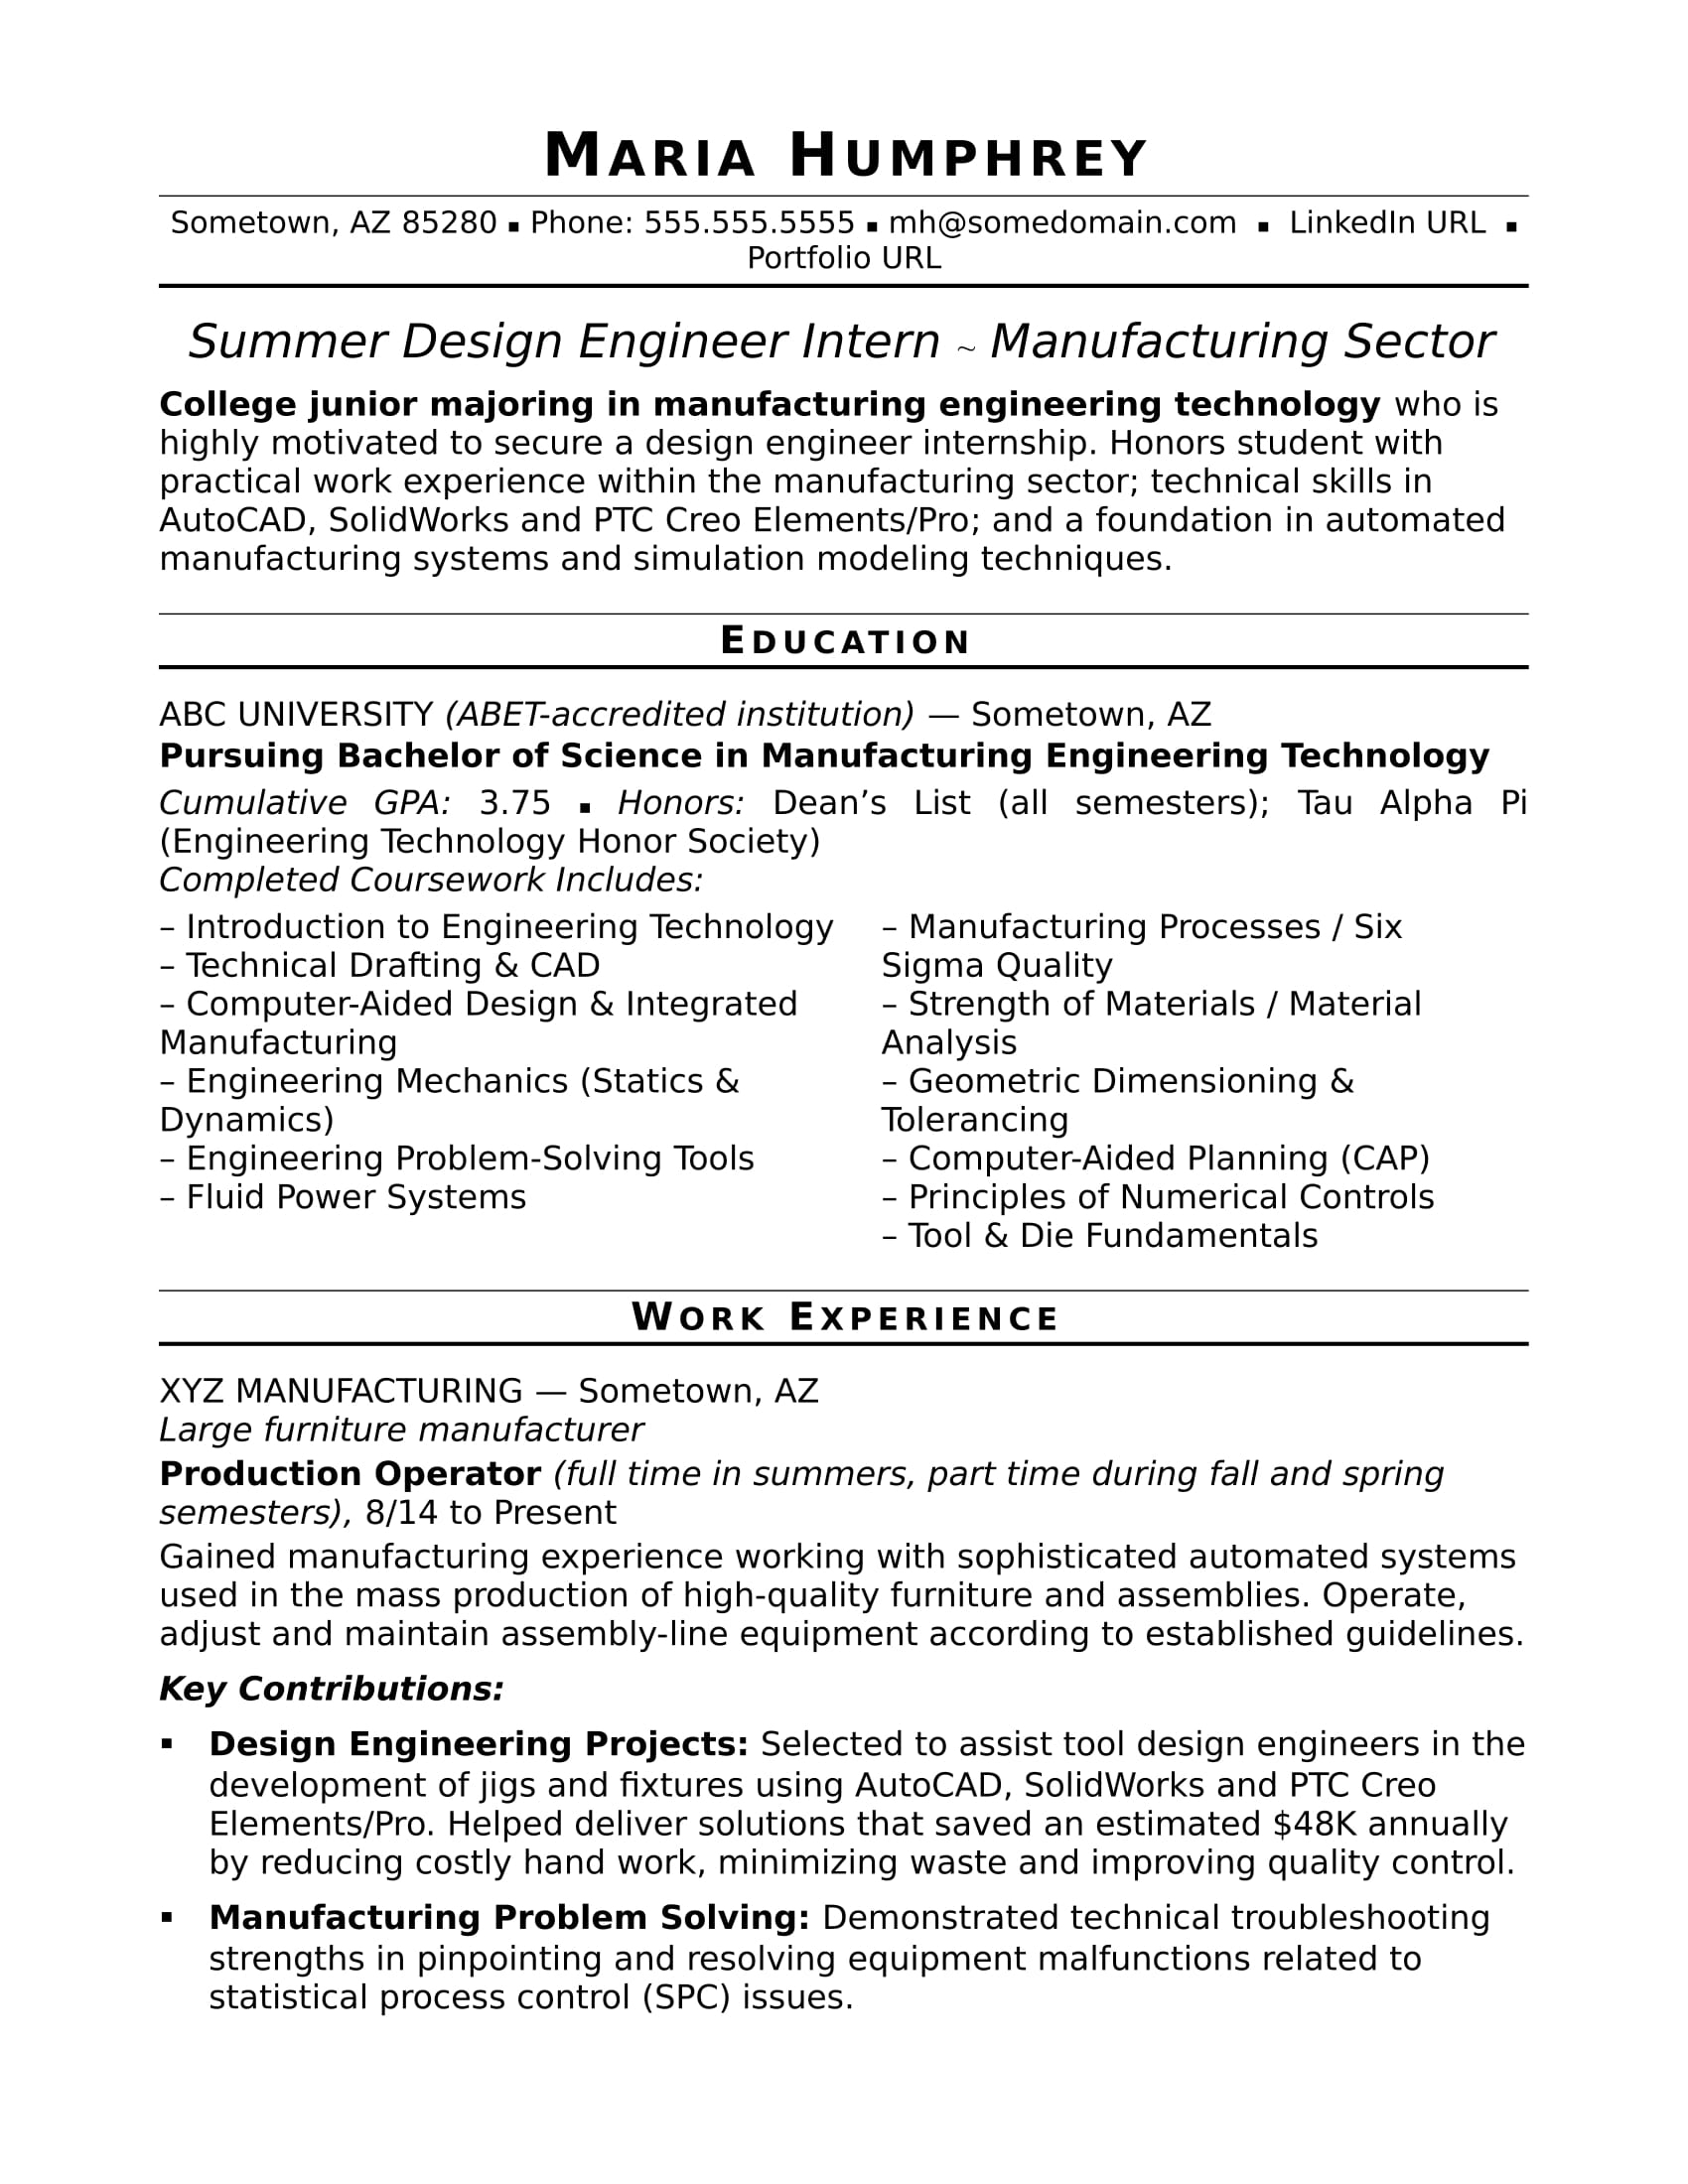 Sample Resume For An Entry Level Design Engineer Monster in measurements 1700 X 2200